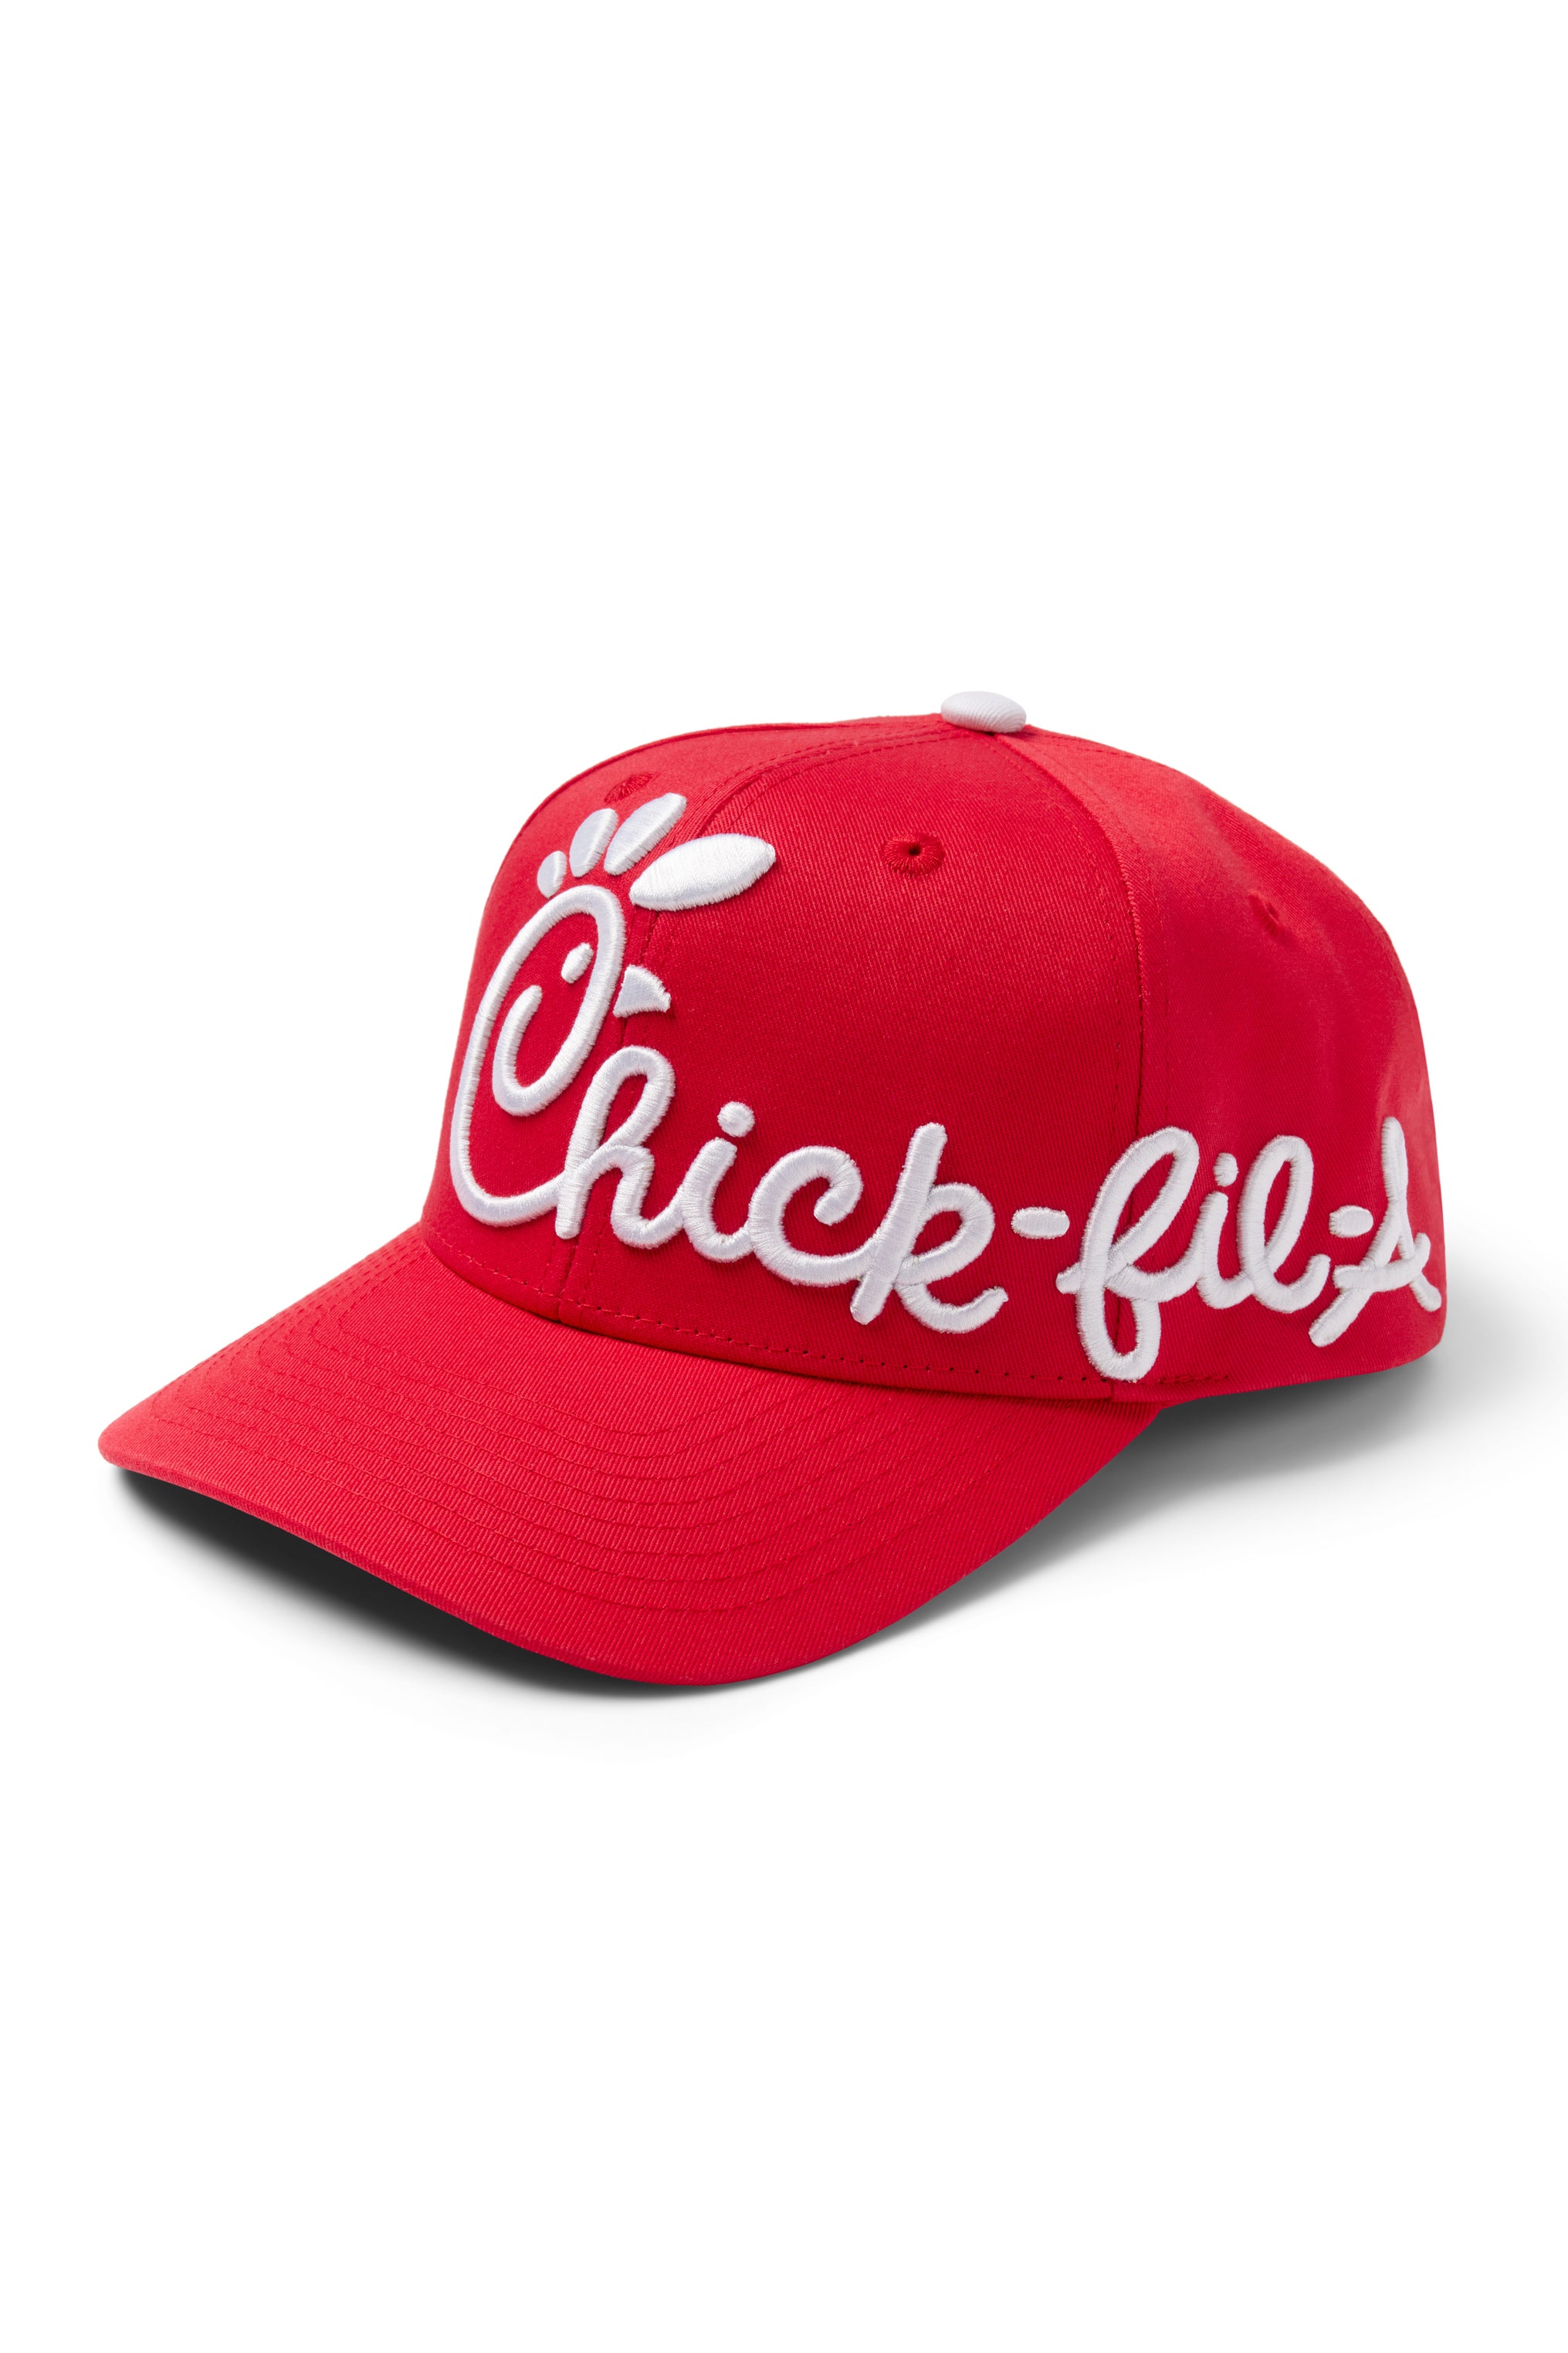 Classic Chick-fil-A Embroidered Hat with raised white Chick-fil-A embroidery